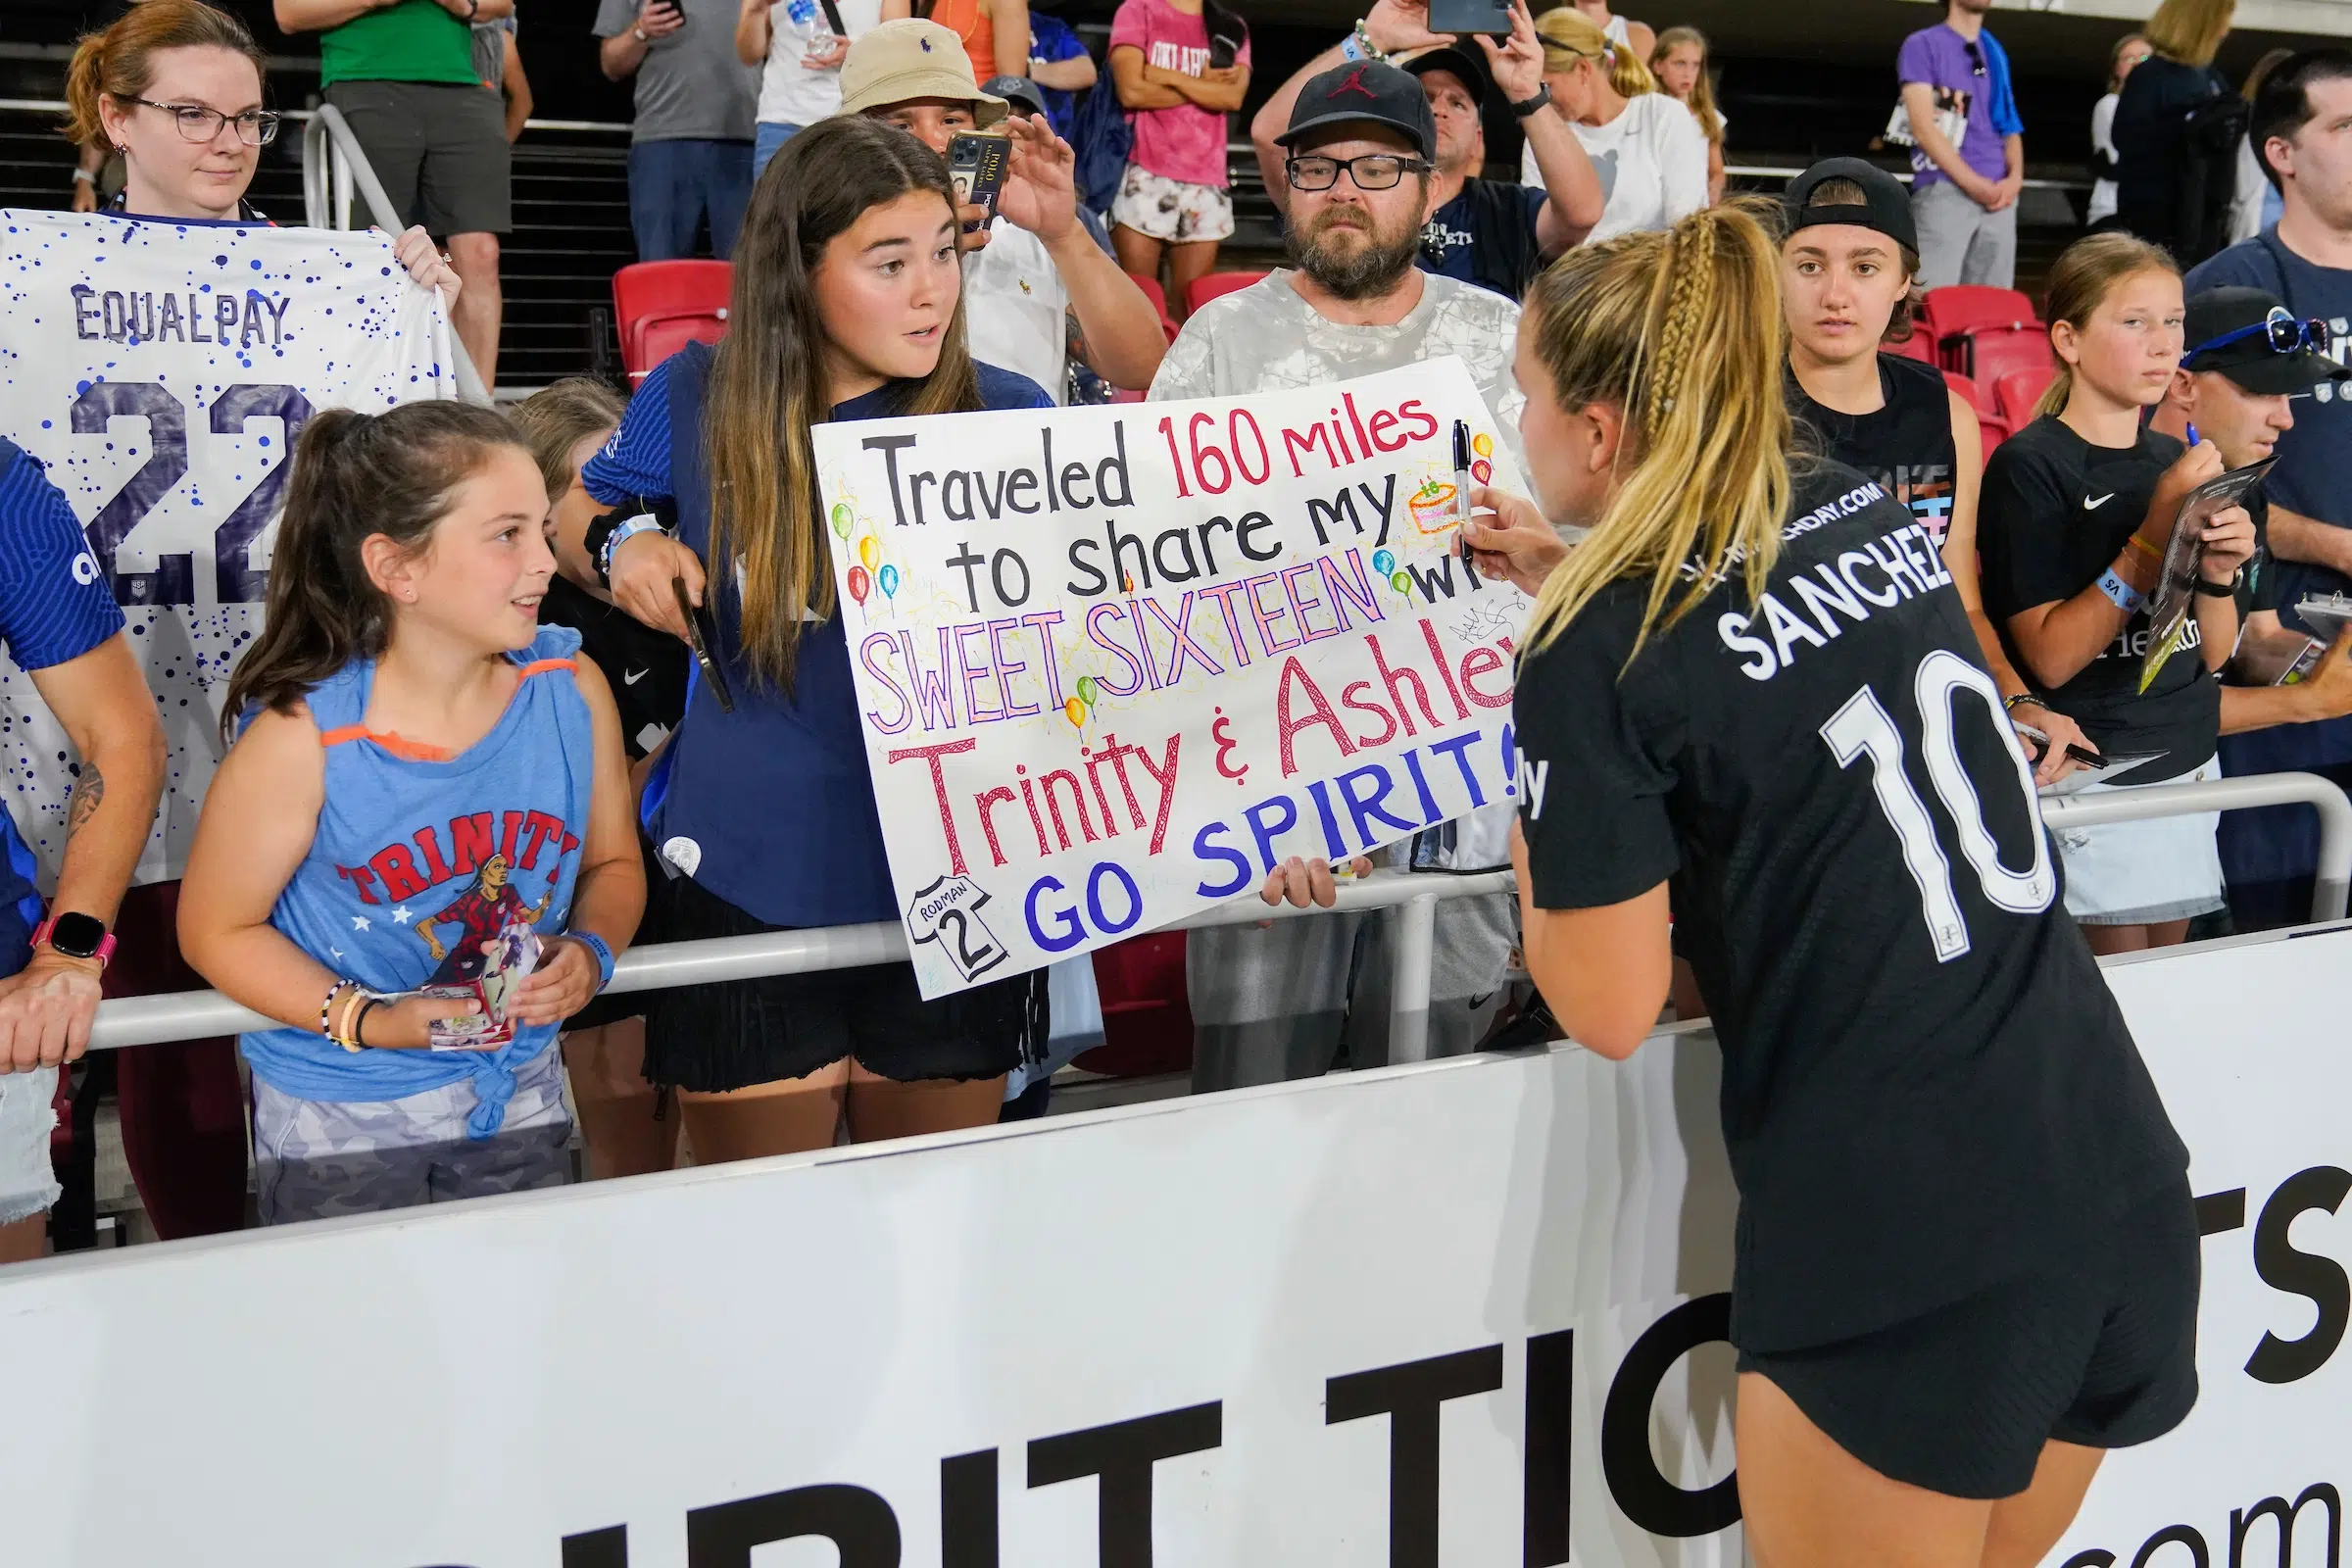 Ashley Sanchez signs a poster held by a young fan.